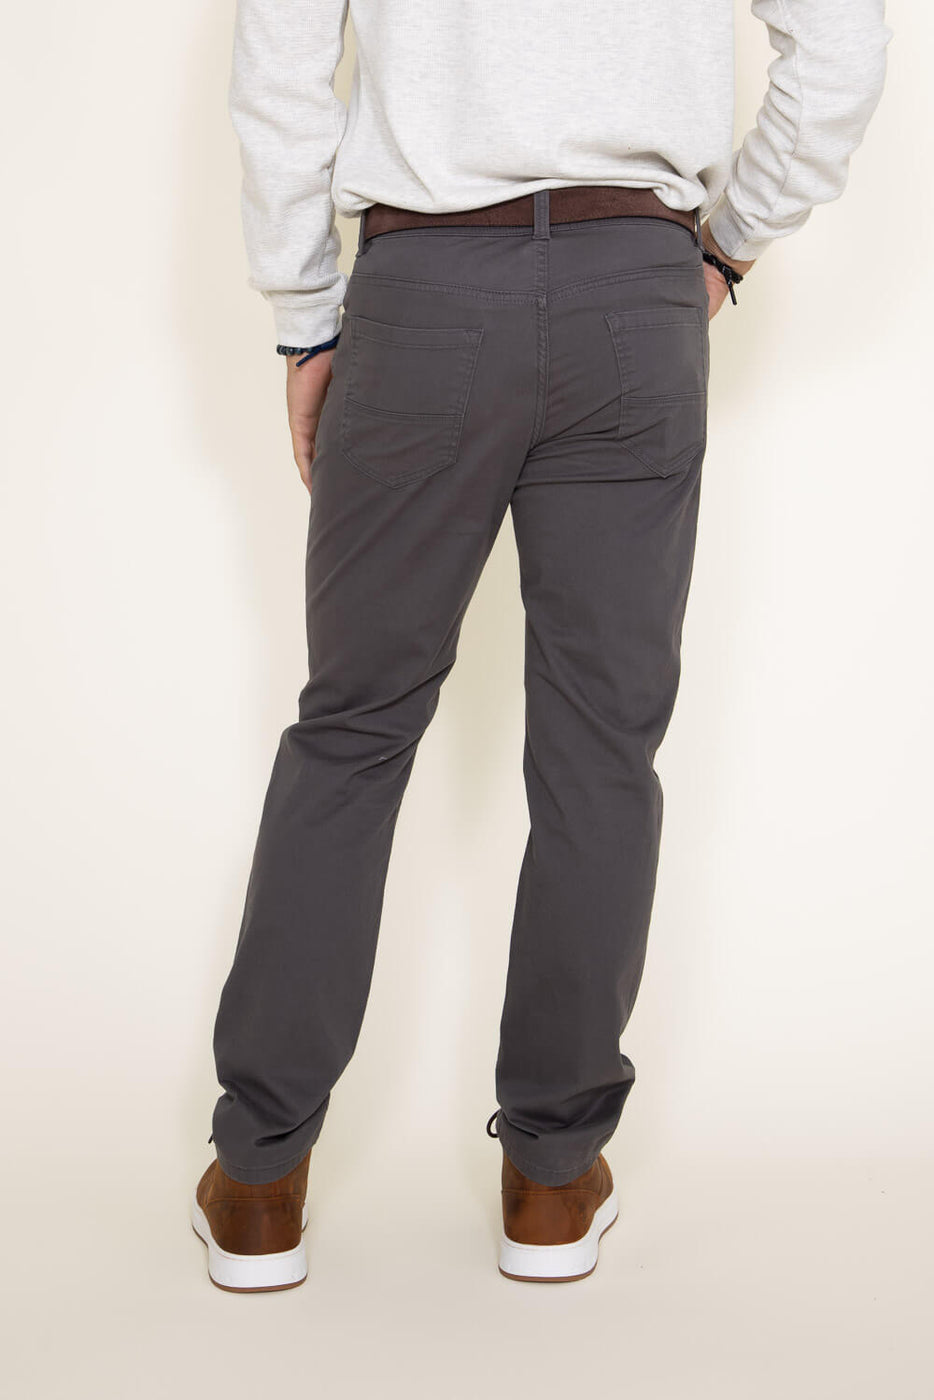 Men's Wrinkle-Free Stretch Twill Pants - and TravelSmith Travel